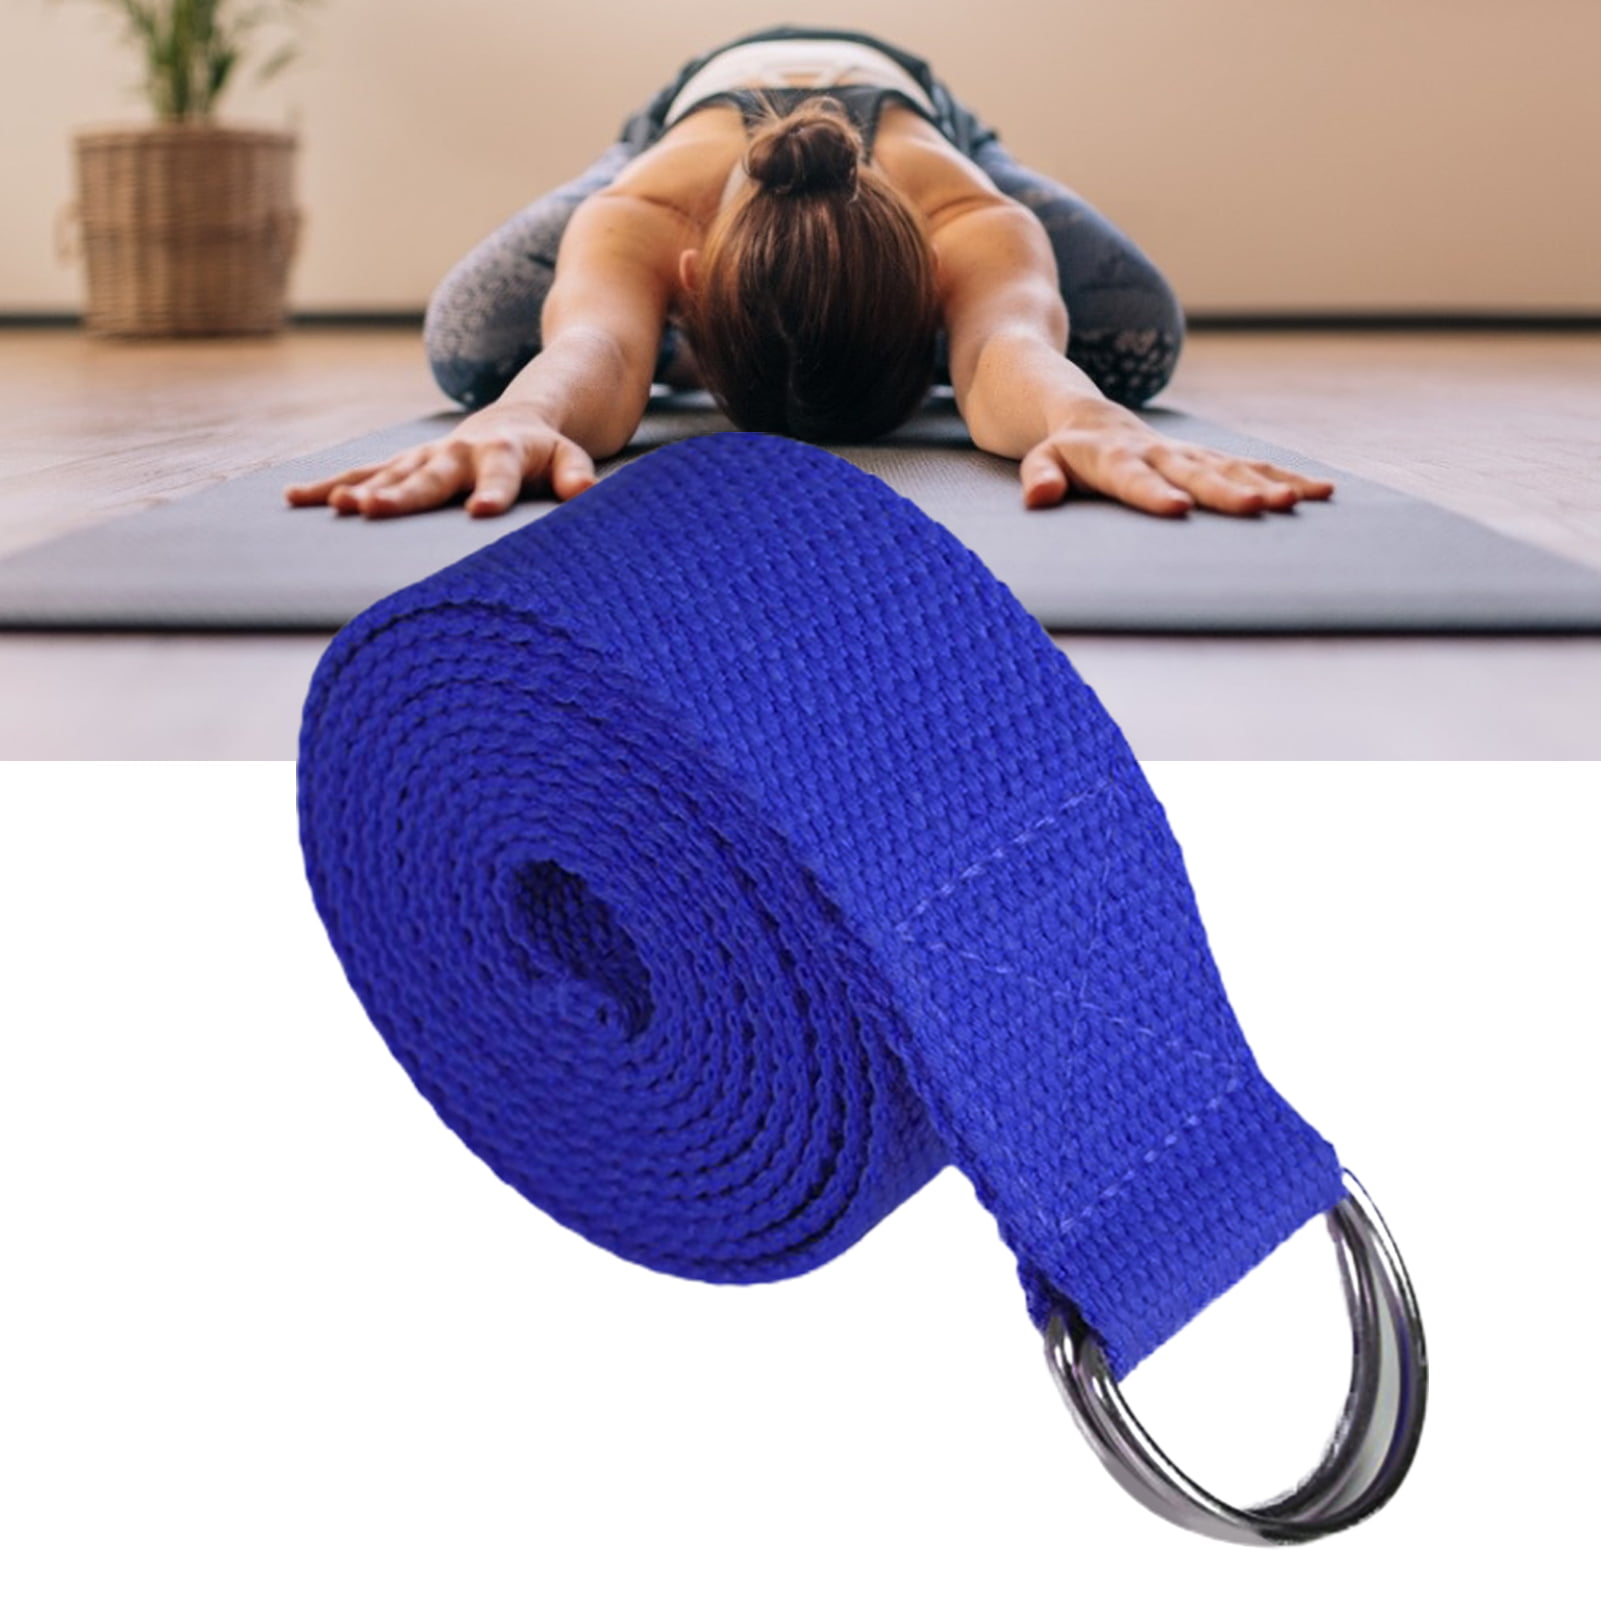 Yoga Strap Stretching Exercise Belts Durable Cotton loops Leg Fitness Restore 